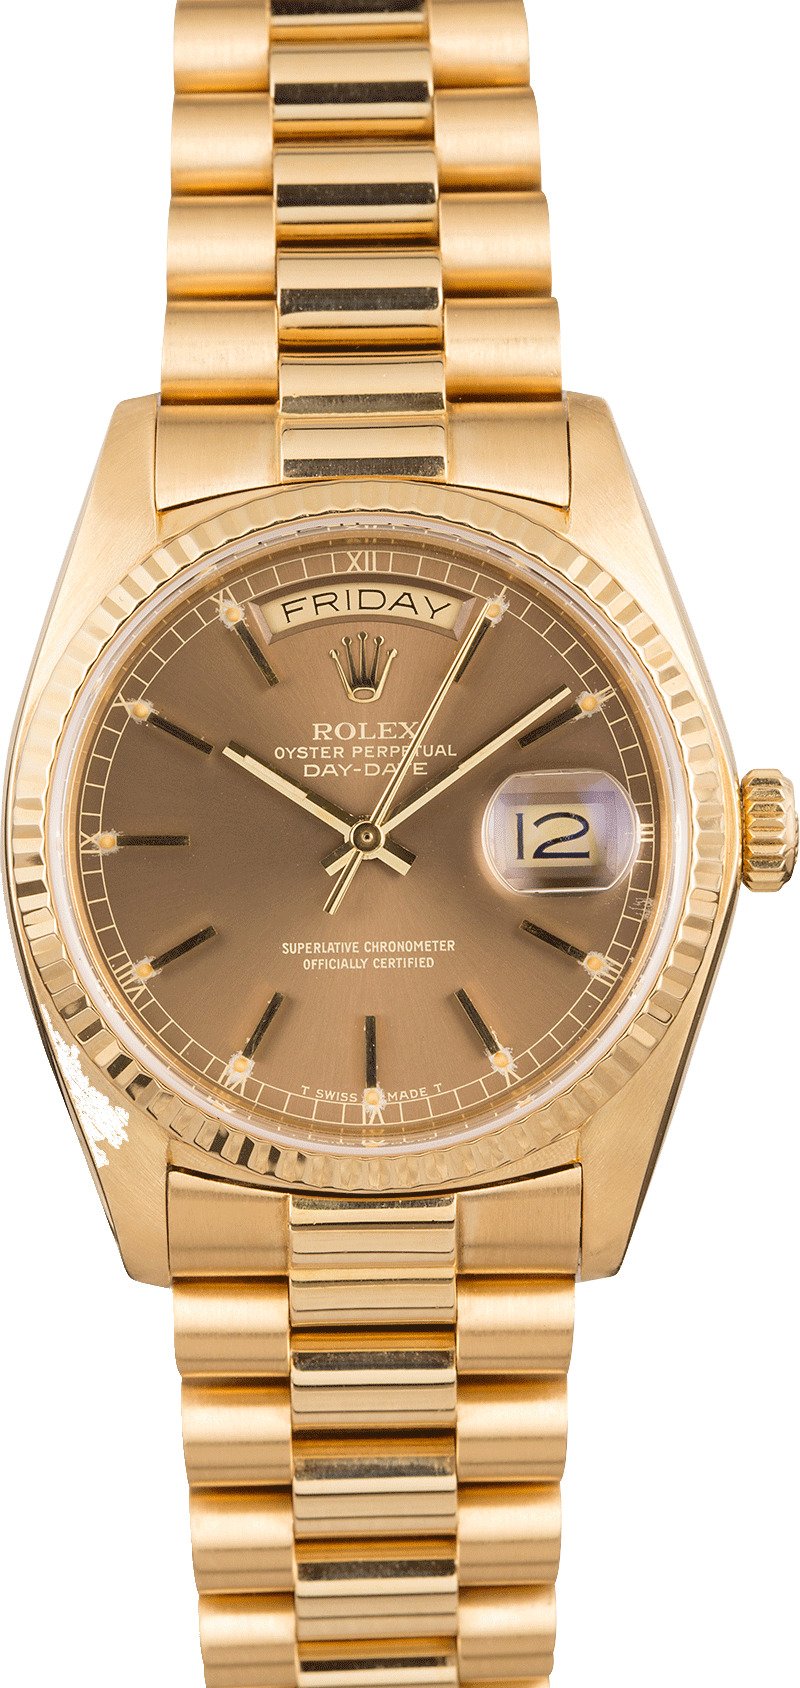 PreOwned Rolex Day-Date 18038 Bronze Dial